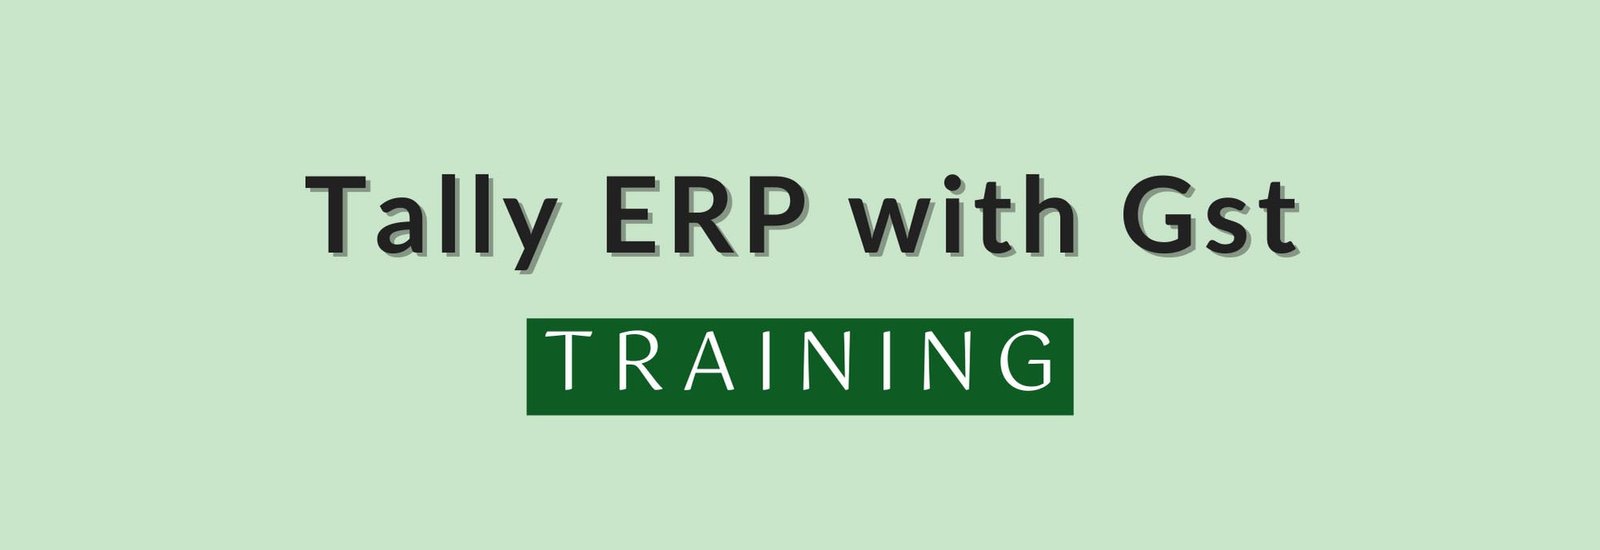 Tally ERP with GST Training